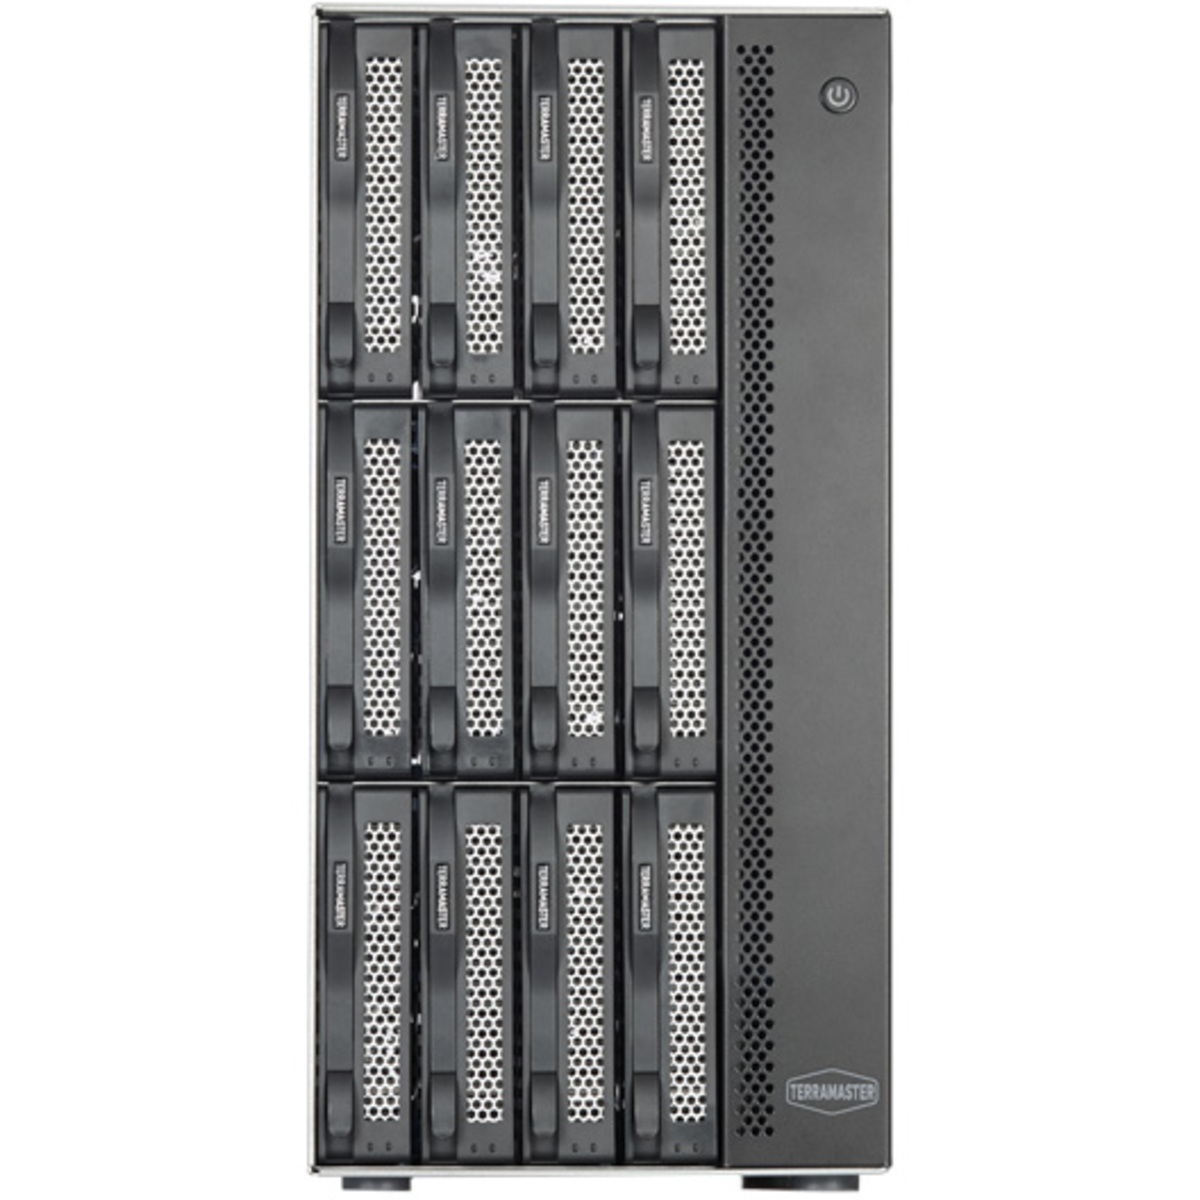 TerraMaster T12-450 42tb 12-Bay Desktop Multimedia / Power User / Business NAS - Network Attached Storage Device 7x6tb Seagate IronWolf ST6000VN006 3.5 5400rpm SATA 6Gb/s HDD NAS Class Drives Installed - Burn-In Tested T12-450